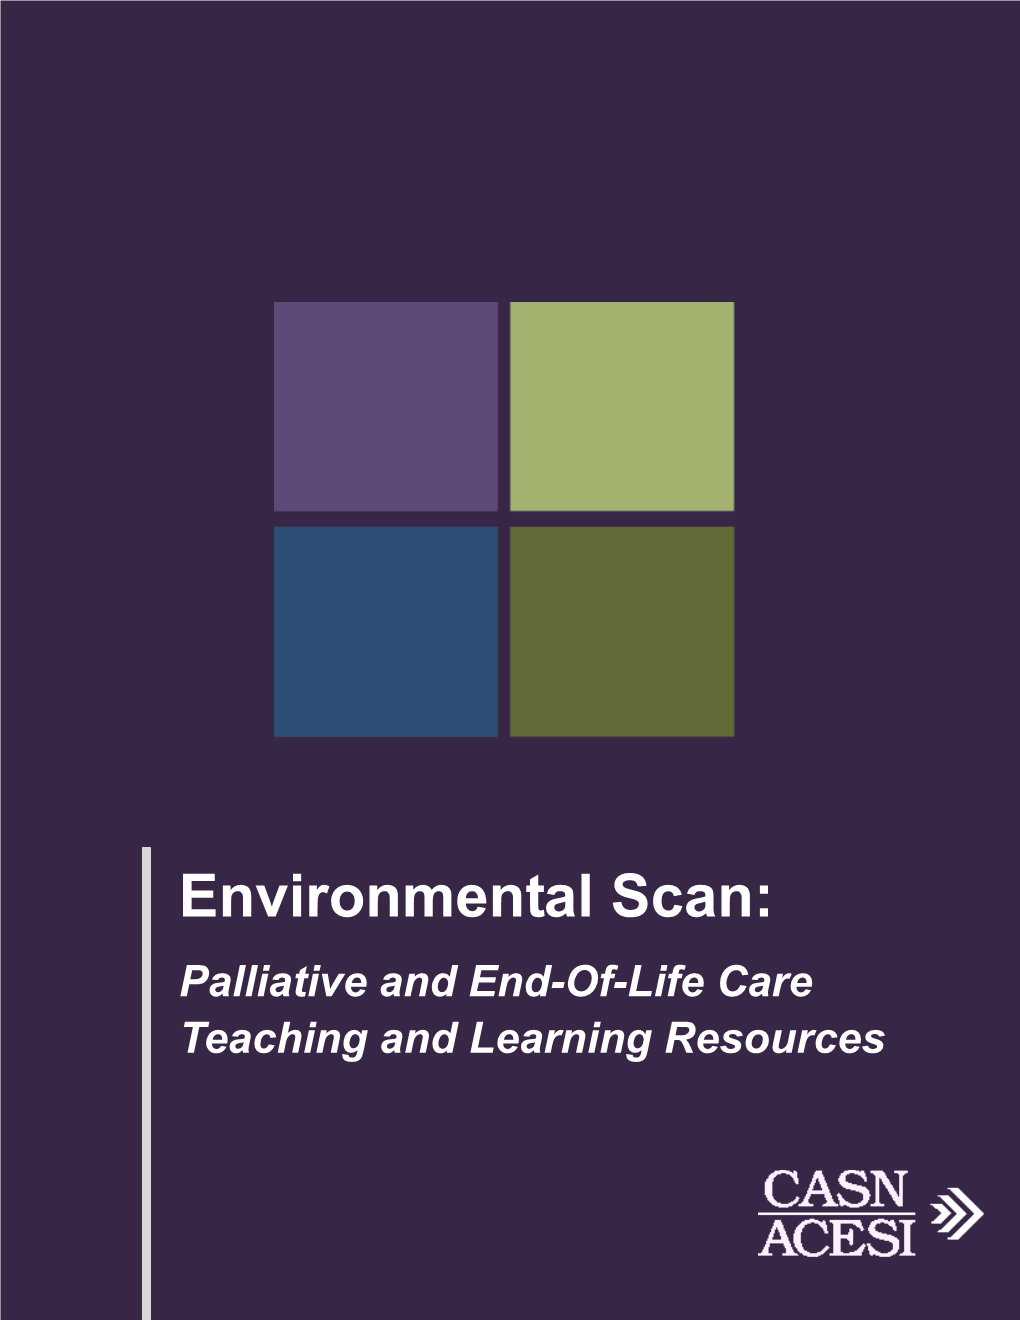 Environmental Scan: Palliative and End-Of-Life Care Teaching and Learning Resources